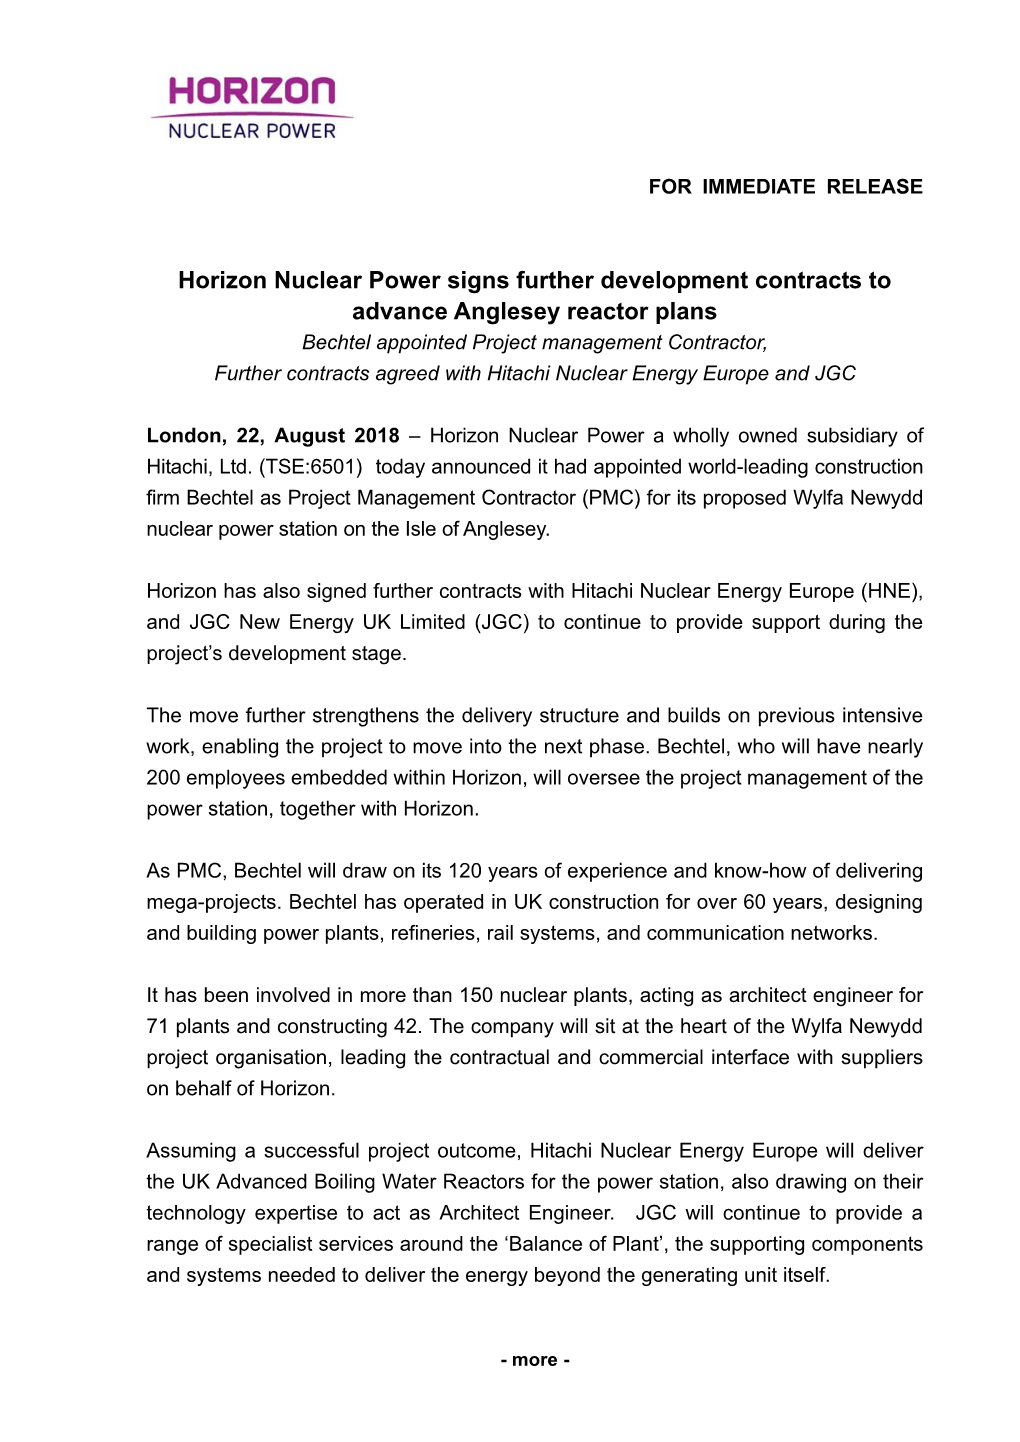 Horizon Nuclear Power Signs Further Development Contracts to Advance